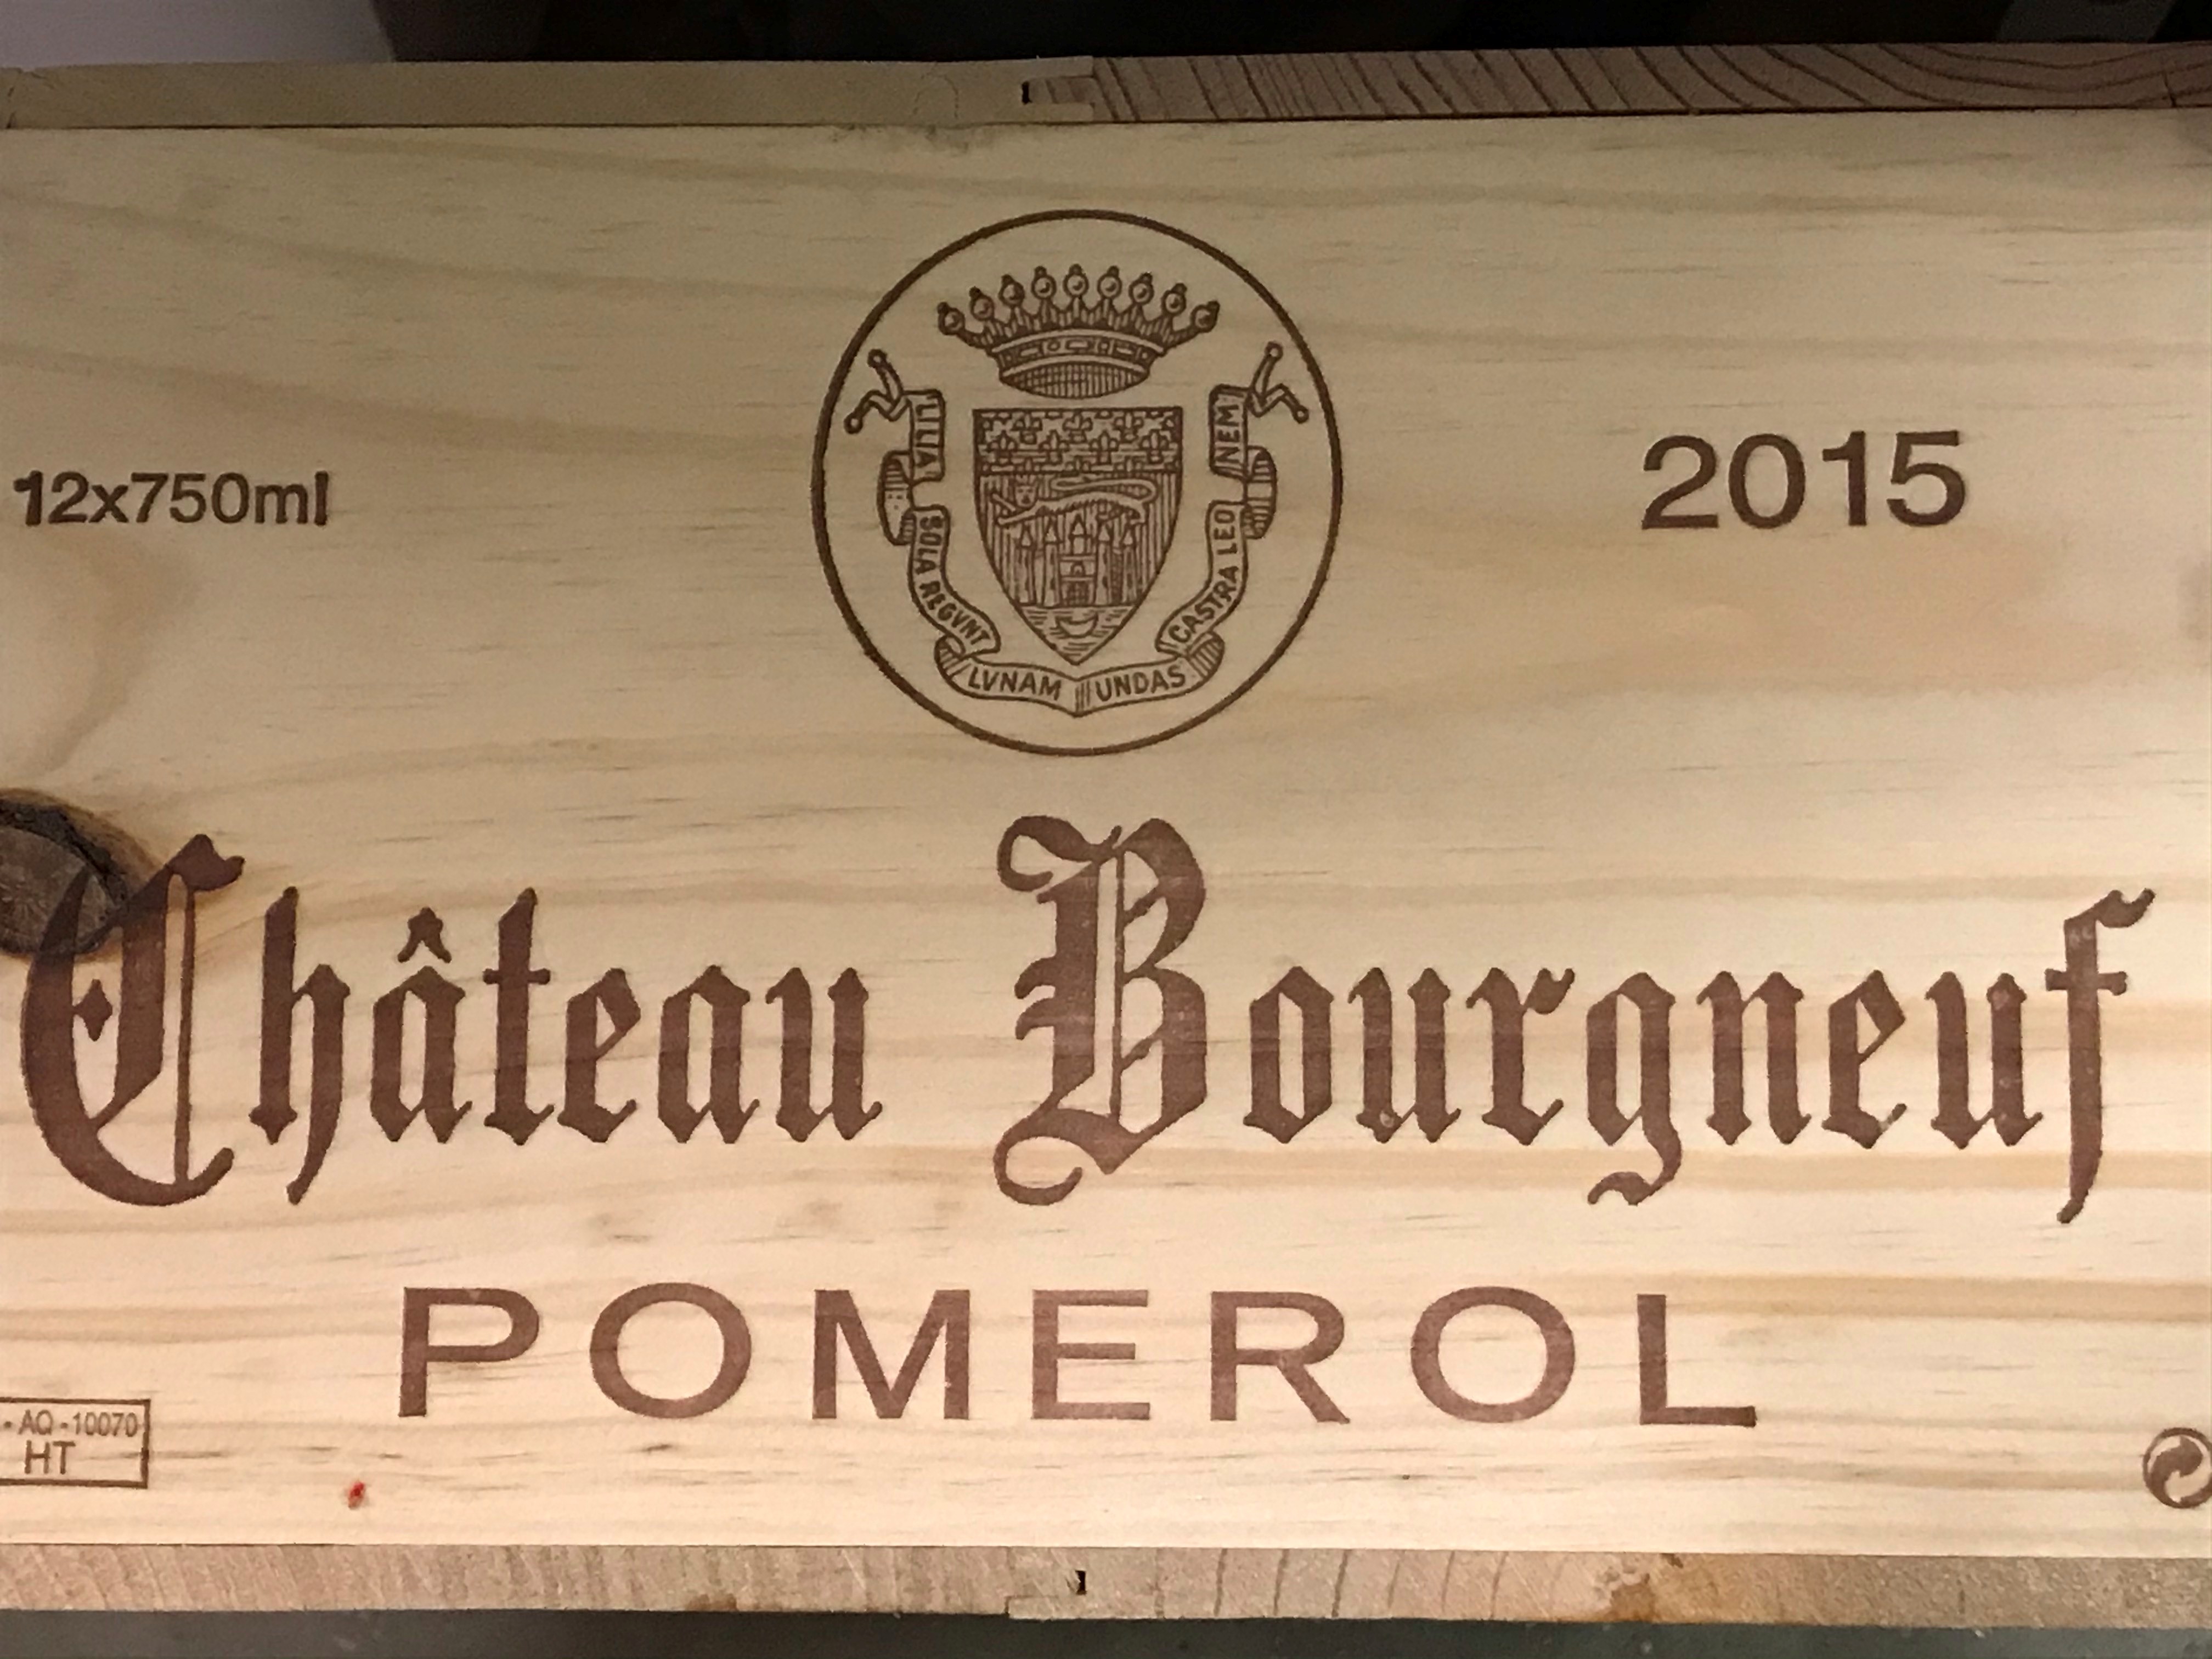 Chateau Bourgneuf, Pomerol 2015, 12 bottles